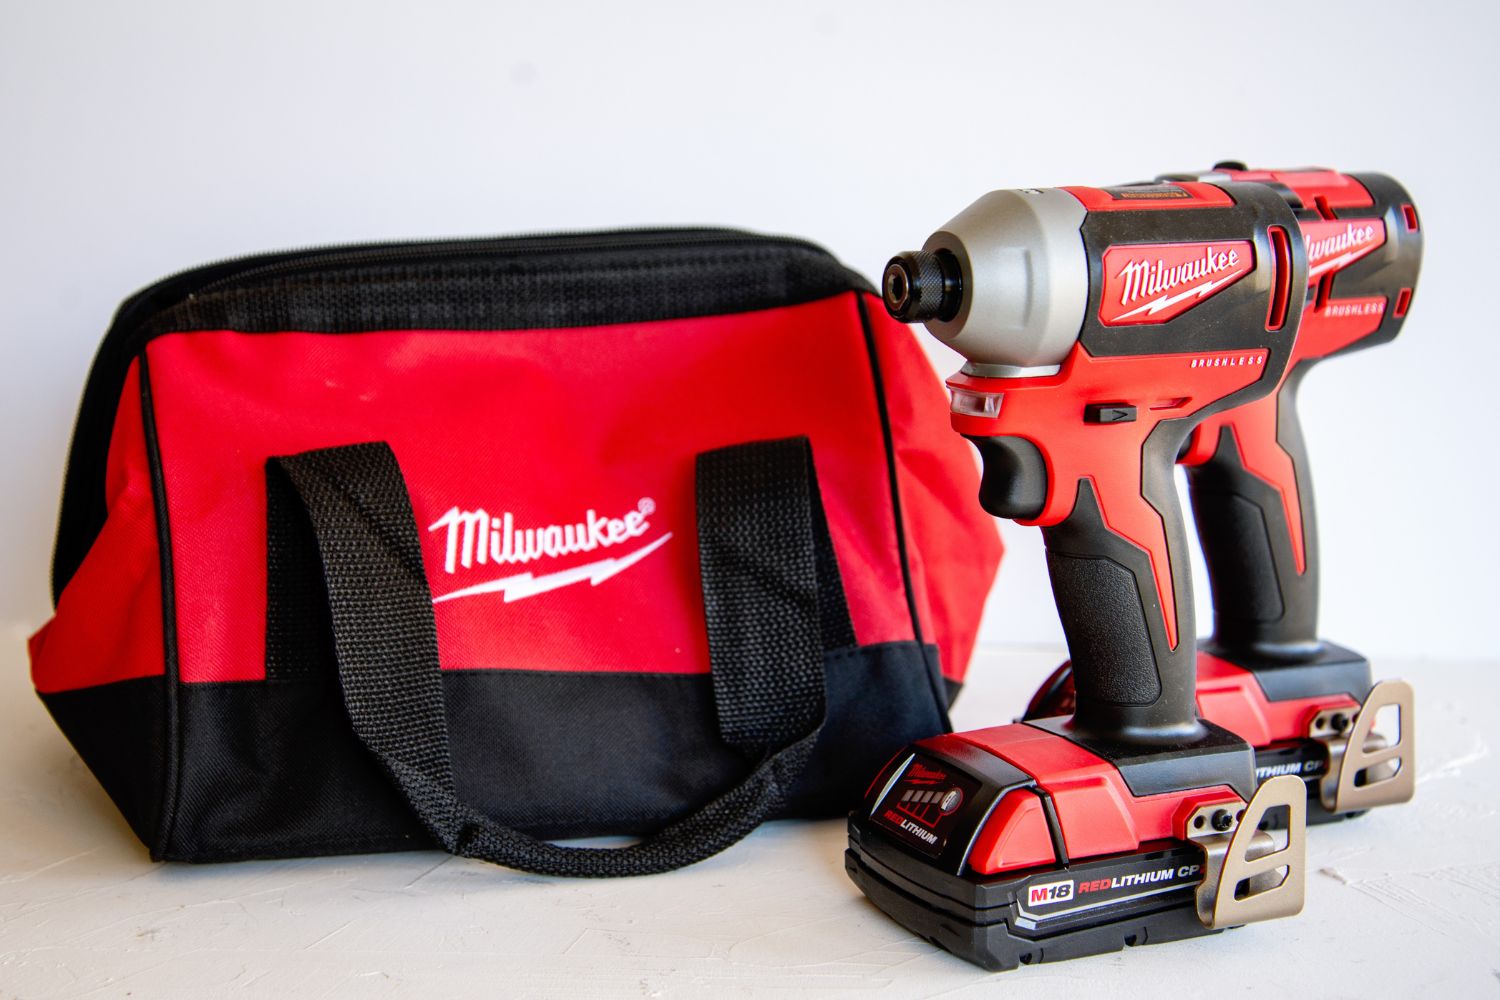 The Milwaukee M18 18V 6-Tool Combo Kit next to its carry bag on a white background.